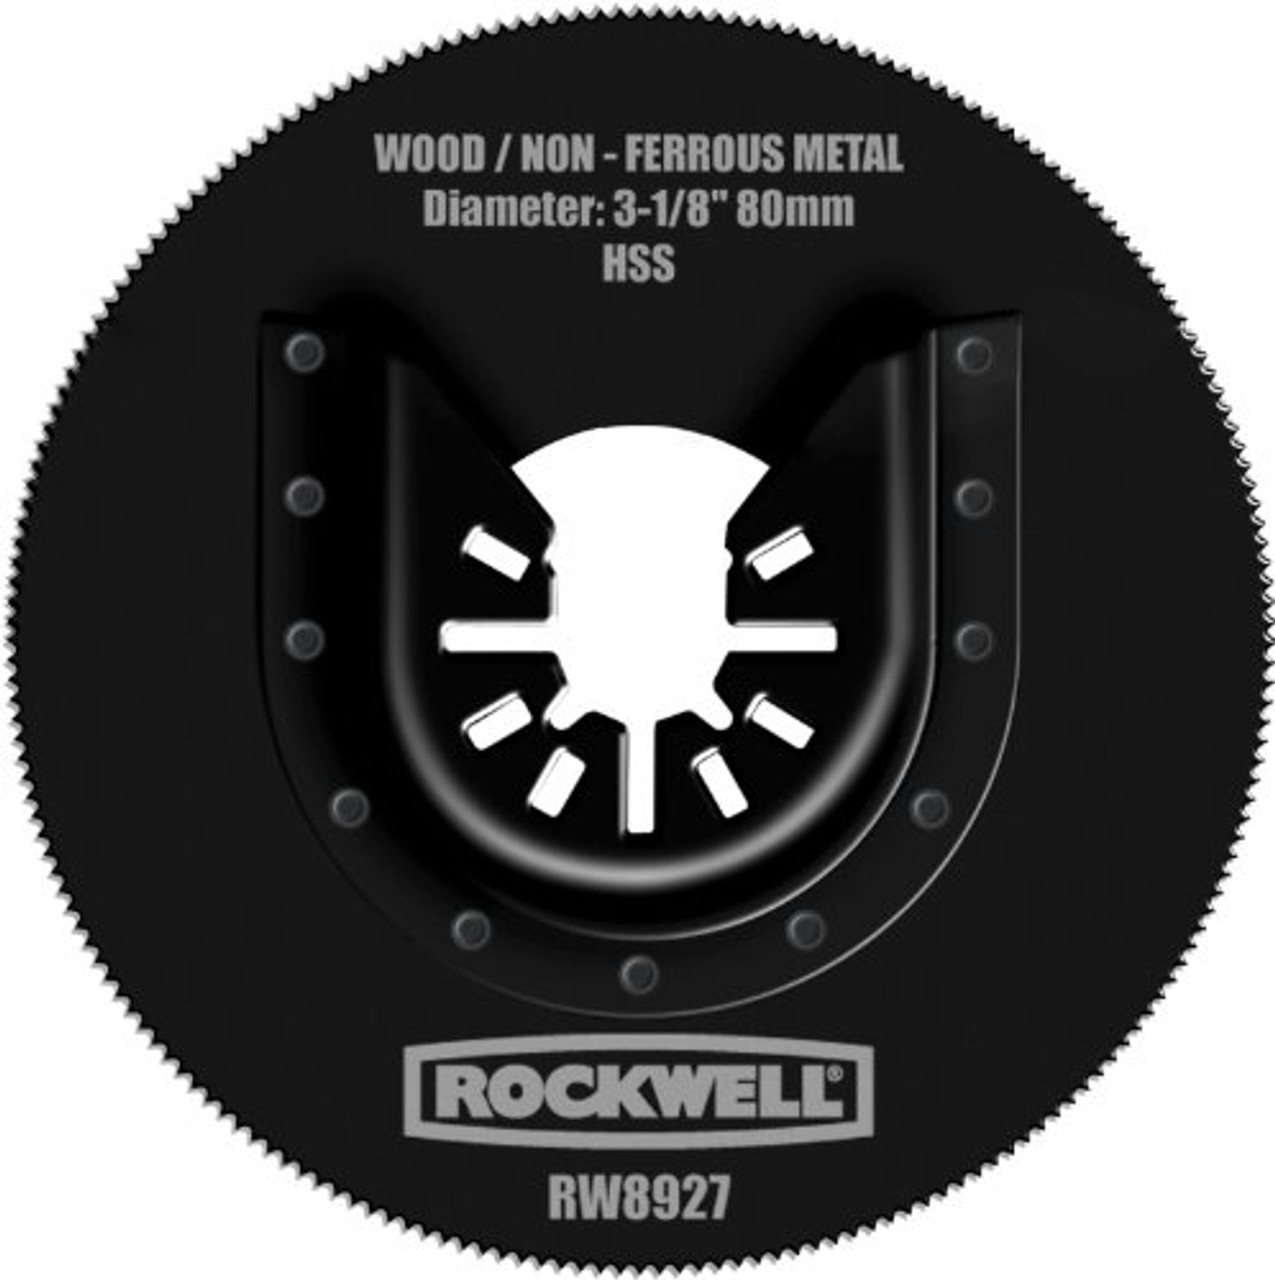 Rockwell RW8926 2-1 2-Inch Sonicrafter Oscillating Multitool Diamond Coated Semicircle Saw Blade with Universal Fit System - 4